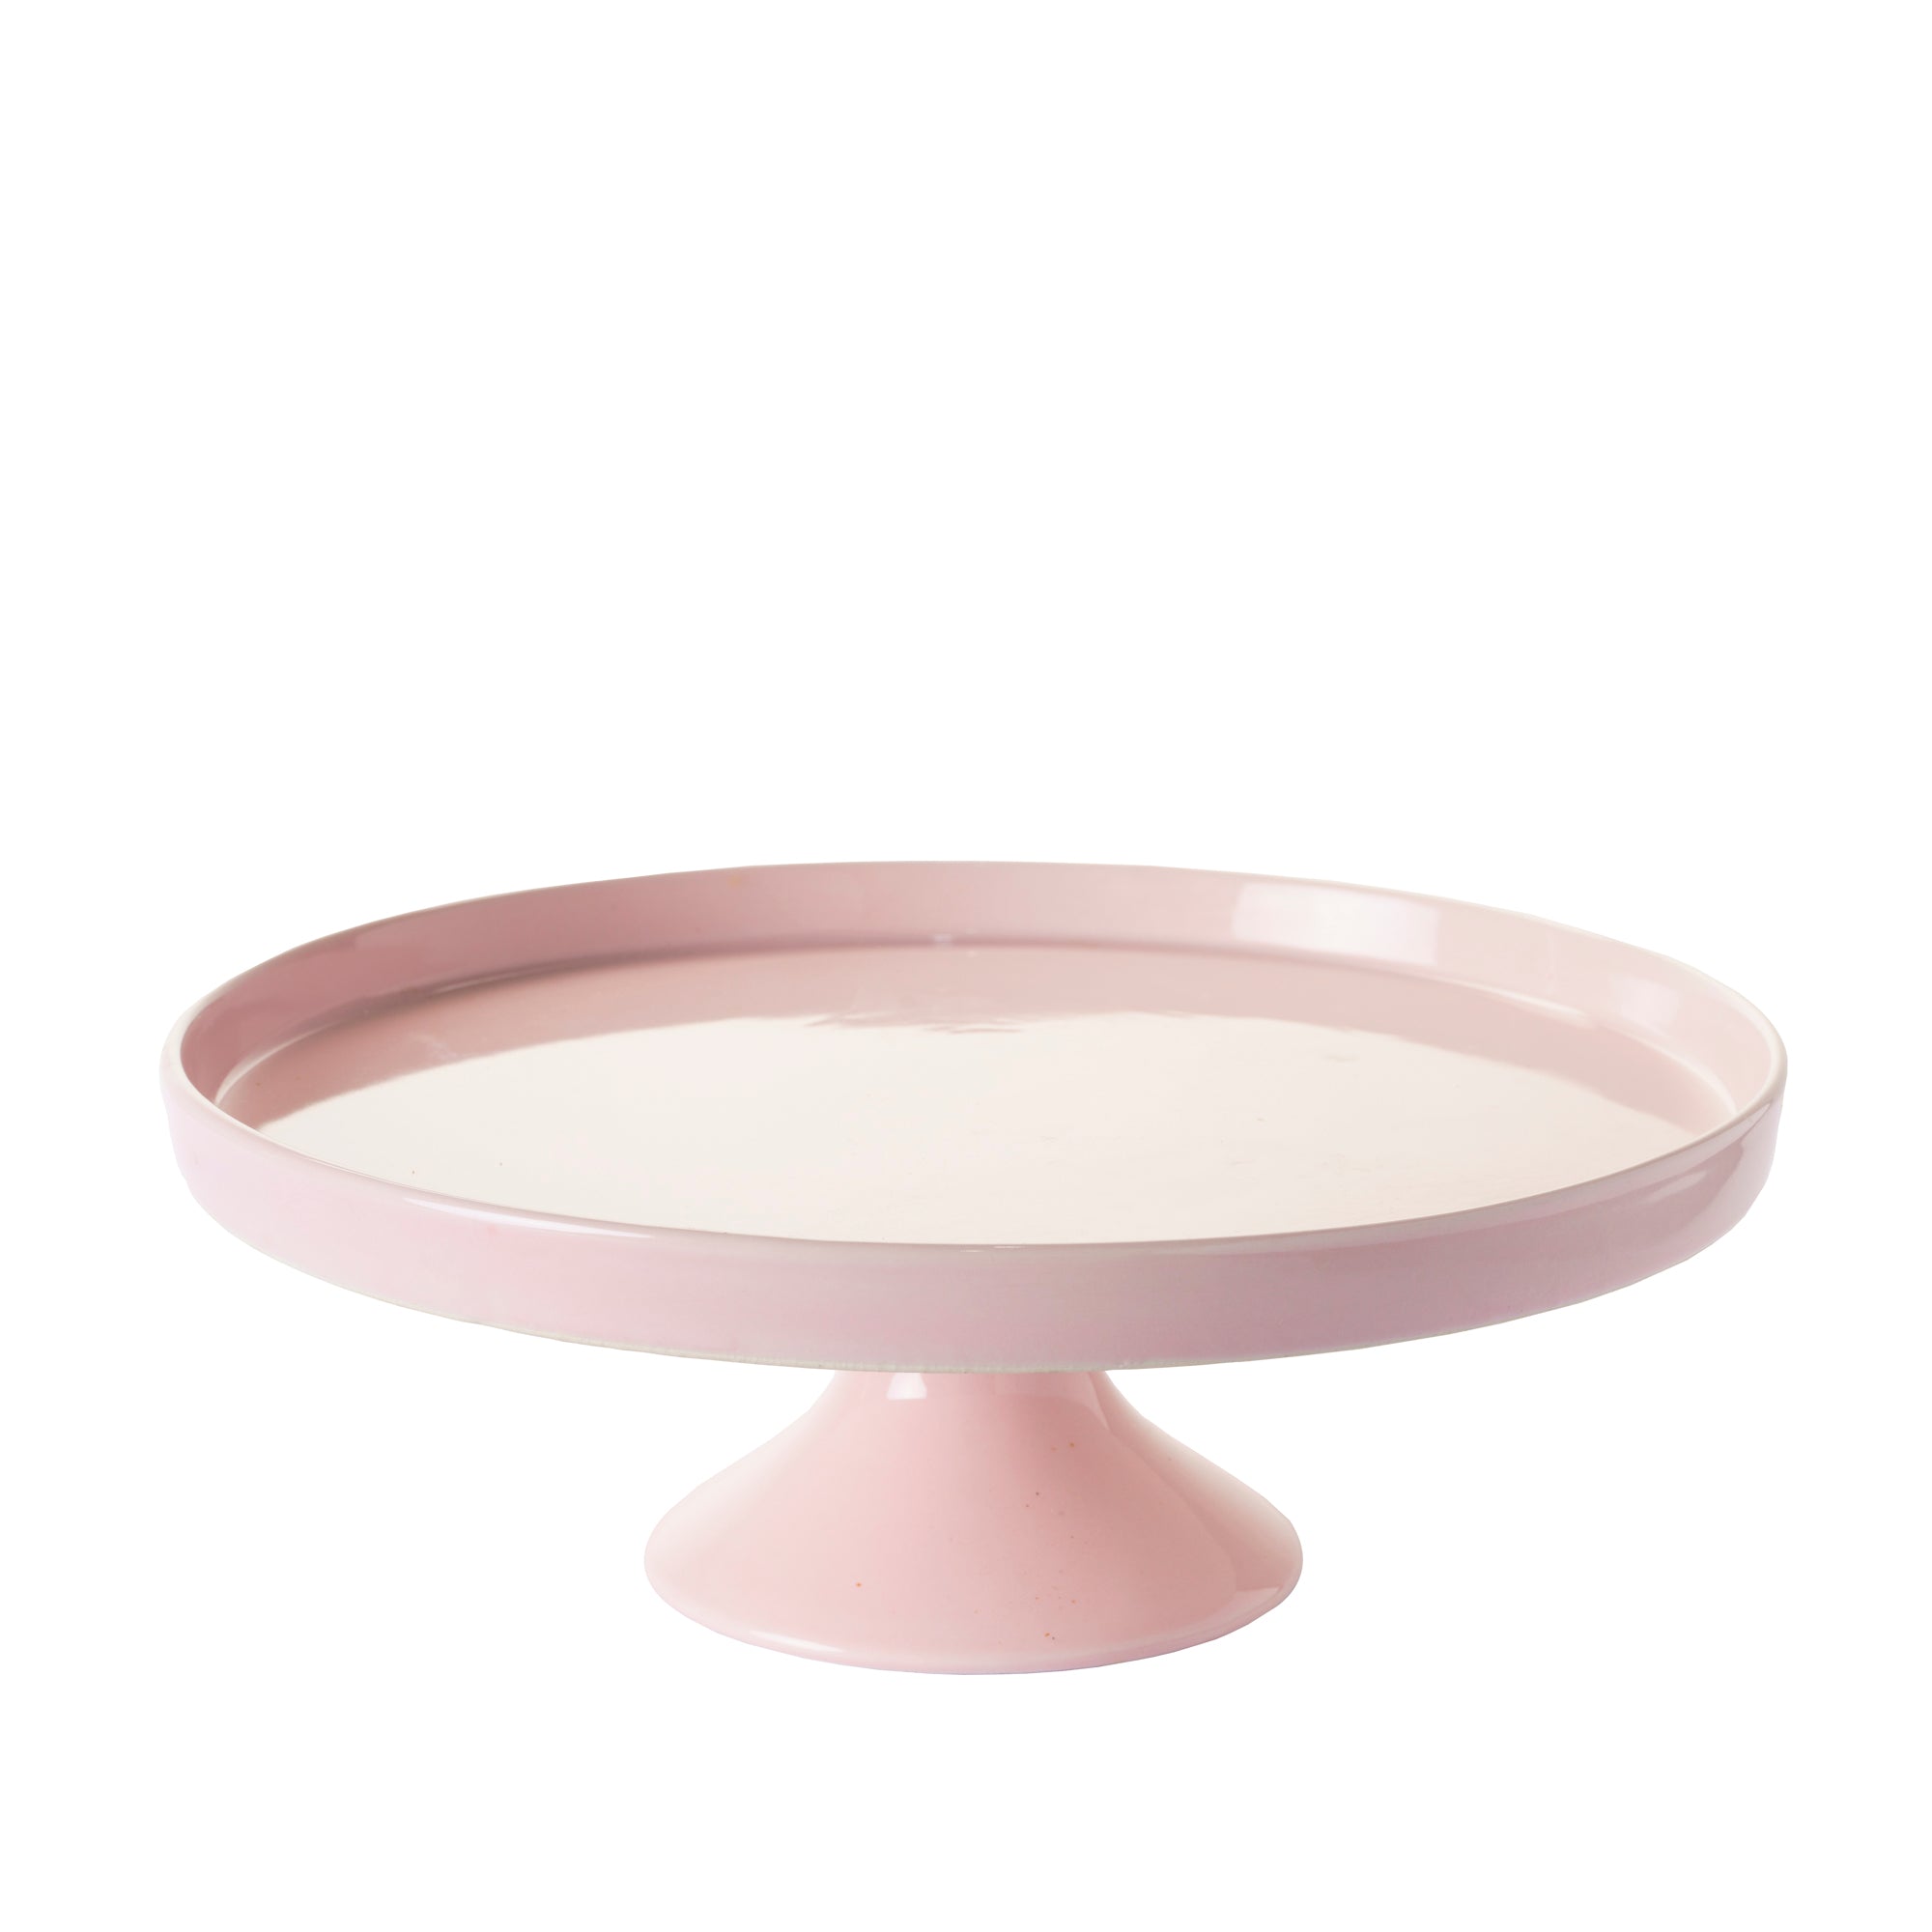 Blush pink porcelain cake stand for hire | For Love & Living Wedding & Event Stylist